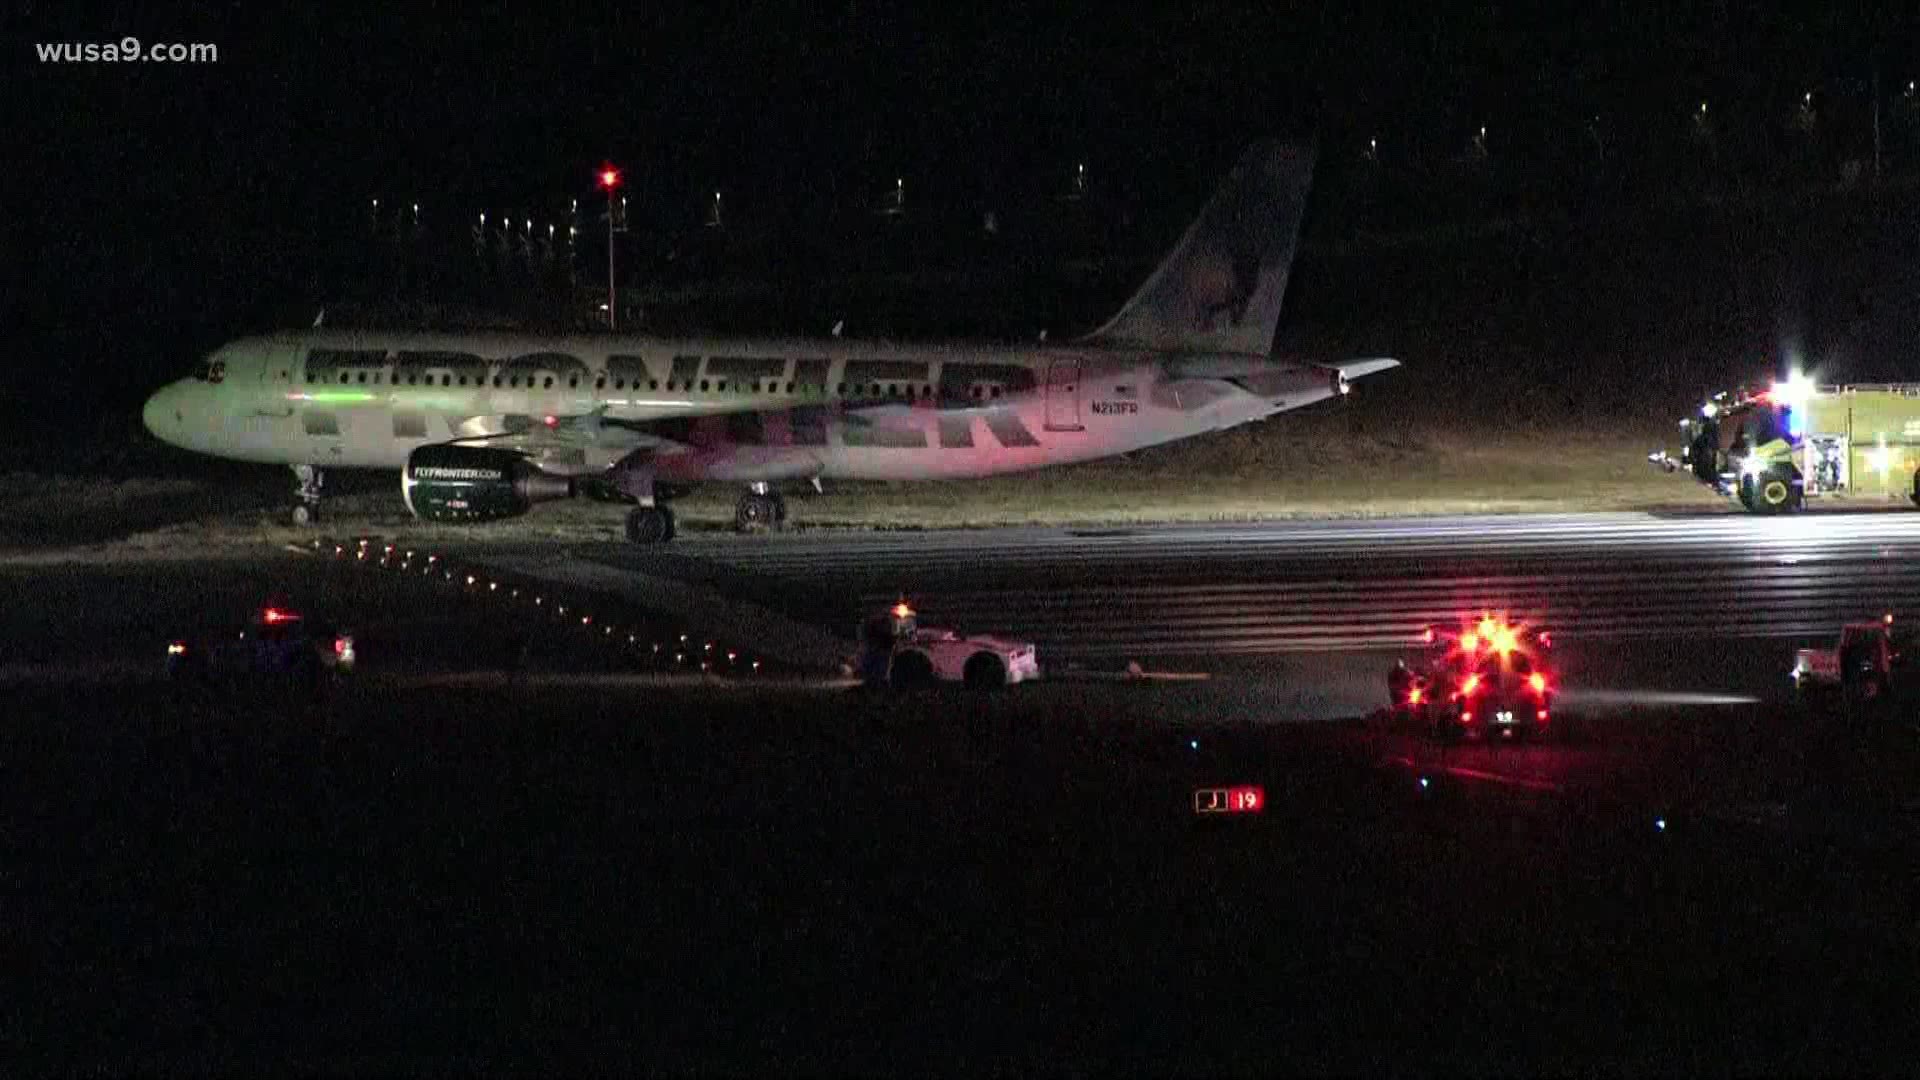 A Frontier Airlines plane has slid off the end of the runway at Ronald Reagan Washington National Airport Friday evening, officials say.